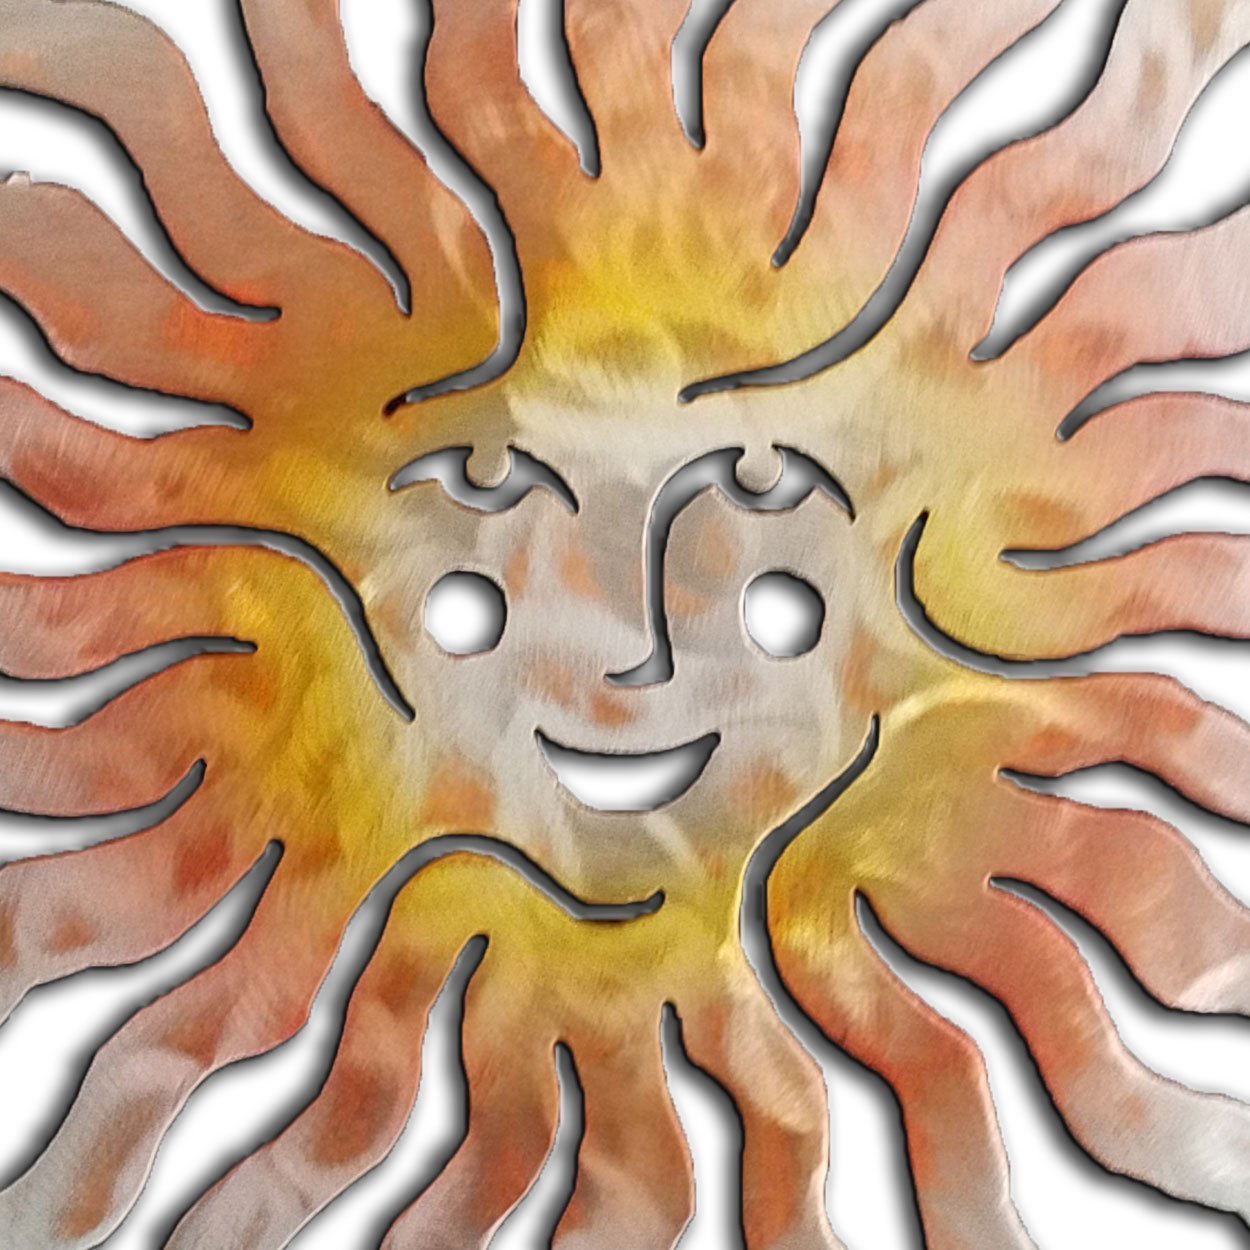 165083 - 24-inch large Sprite Sun Face 3D Metal Wall Art in a vibrant sunset swirl finish